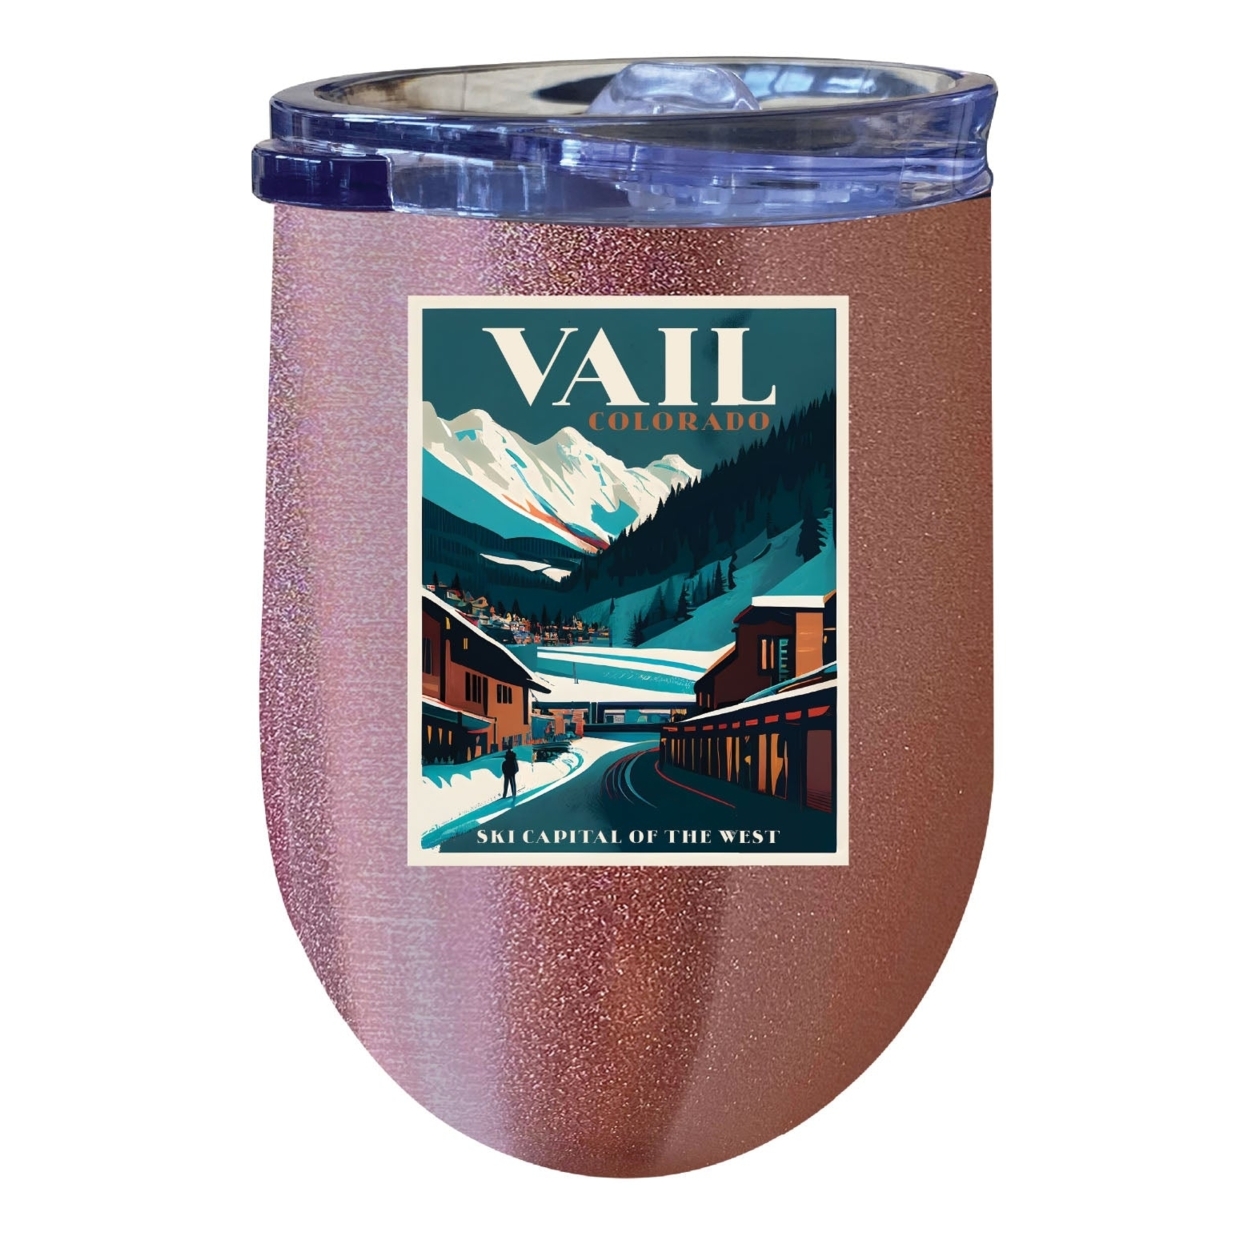 Vail Colorado Souvenir 12 Oz Insulated Wine Stainless Steel Tumbler - Gold